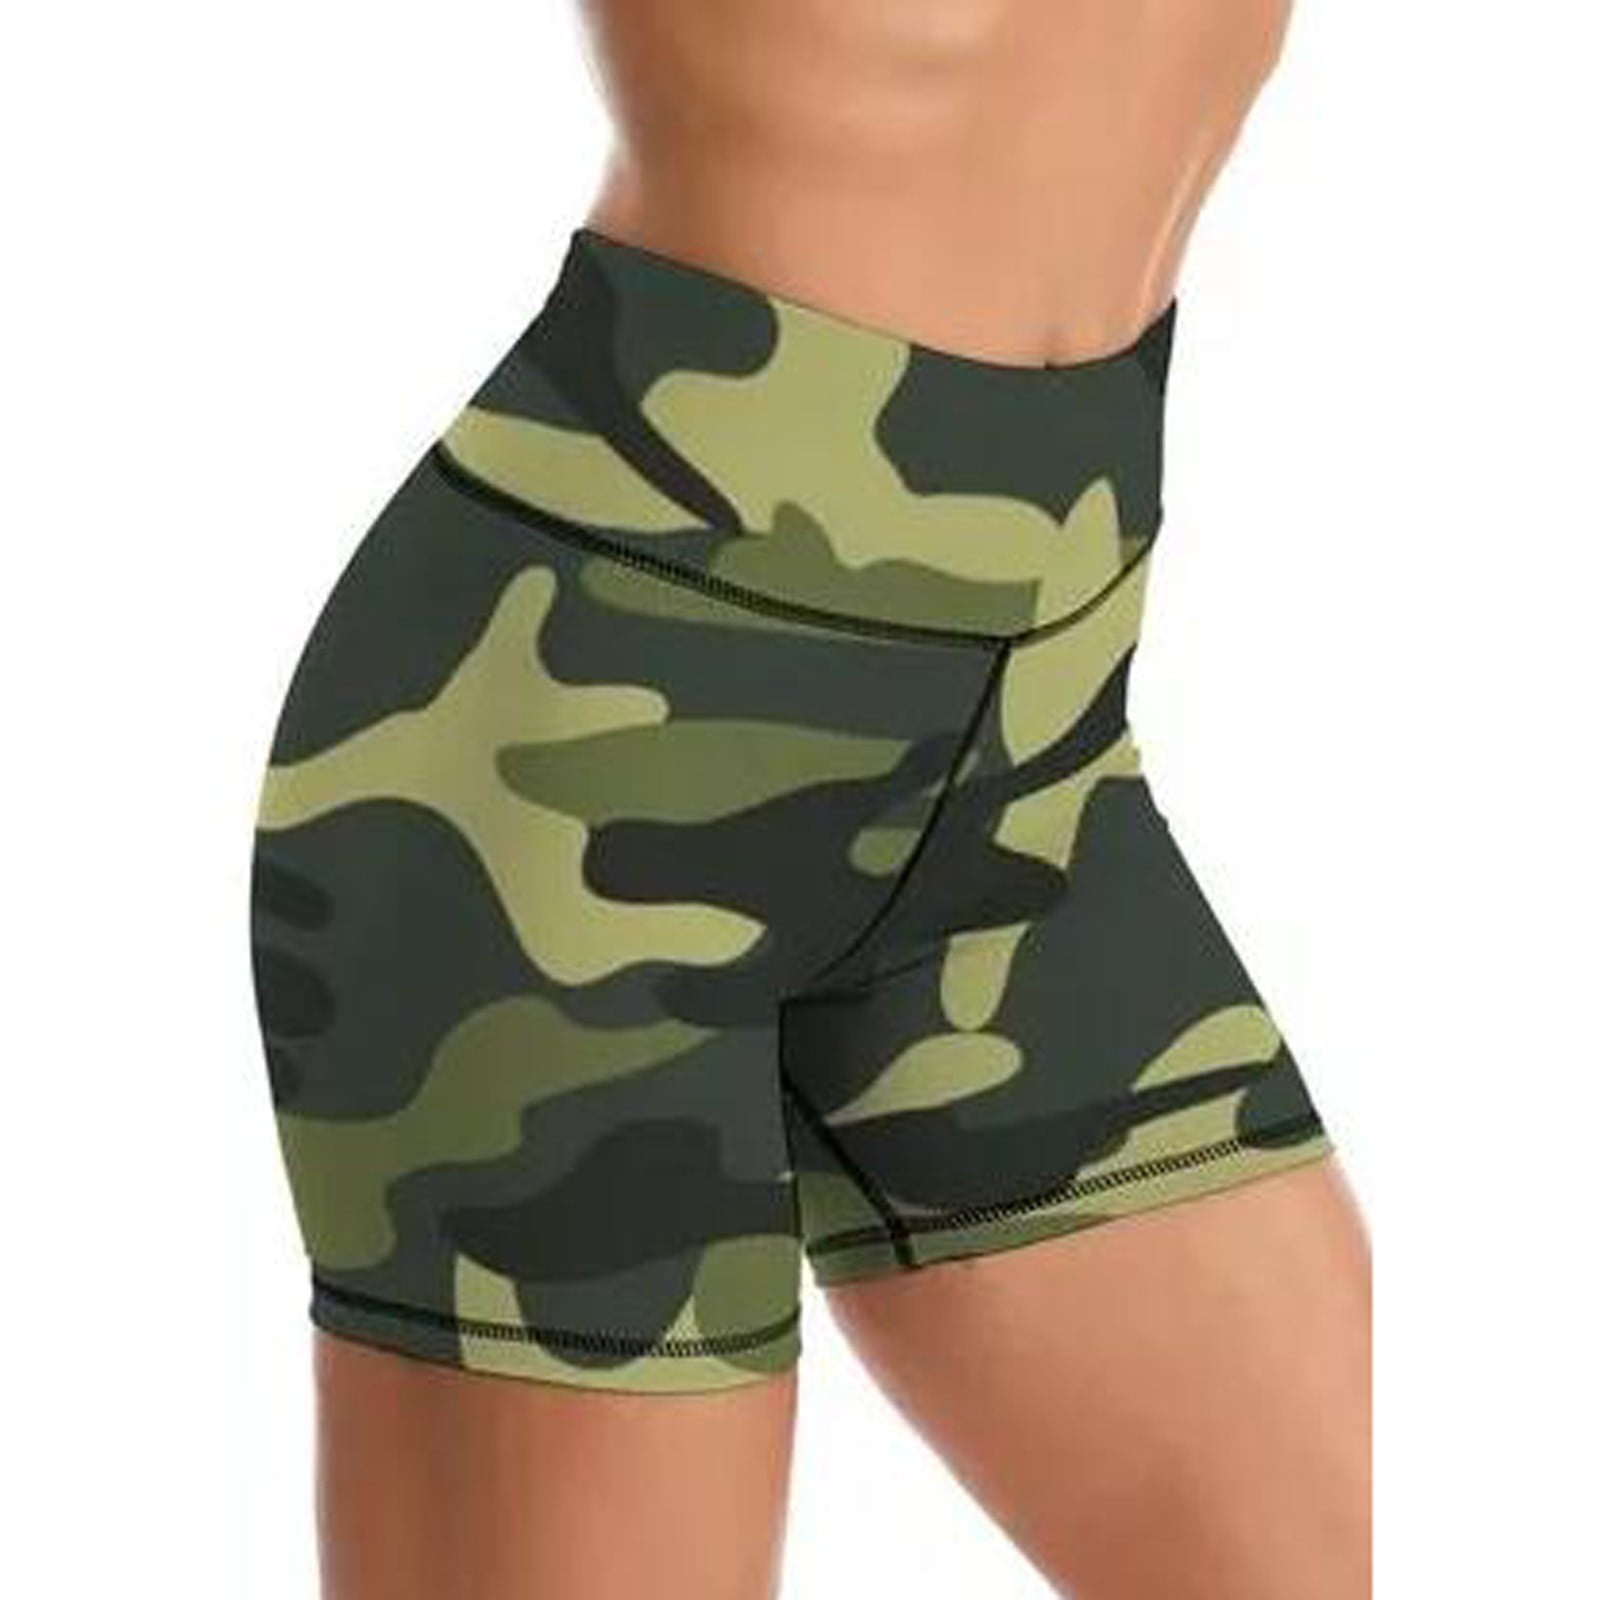 EQWLJWE Yoga Pants for Women Leopard Camouflage Stripe Print Hip Lift  Fitness Casual Shorts Yoga Pants Carry Concealed Yoga Pants,Deals,Clearance  